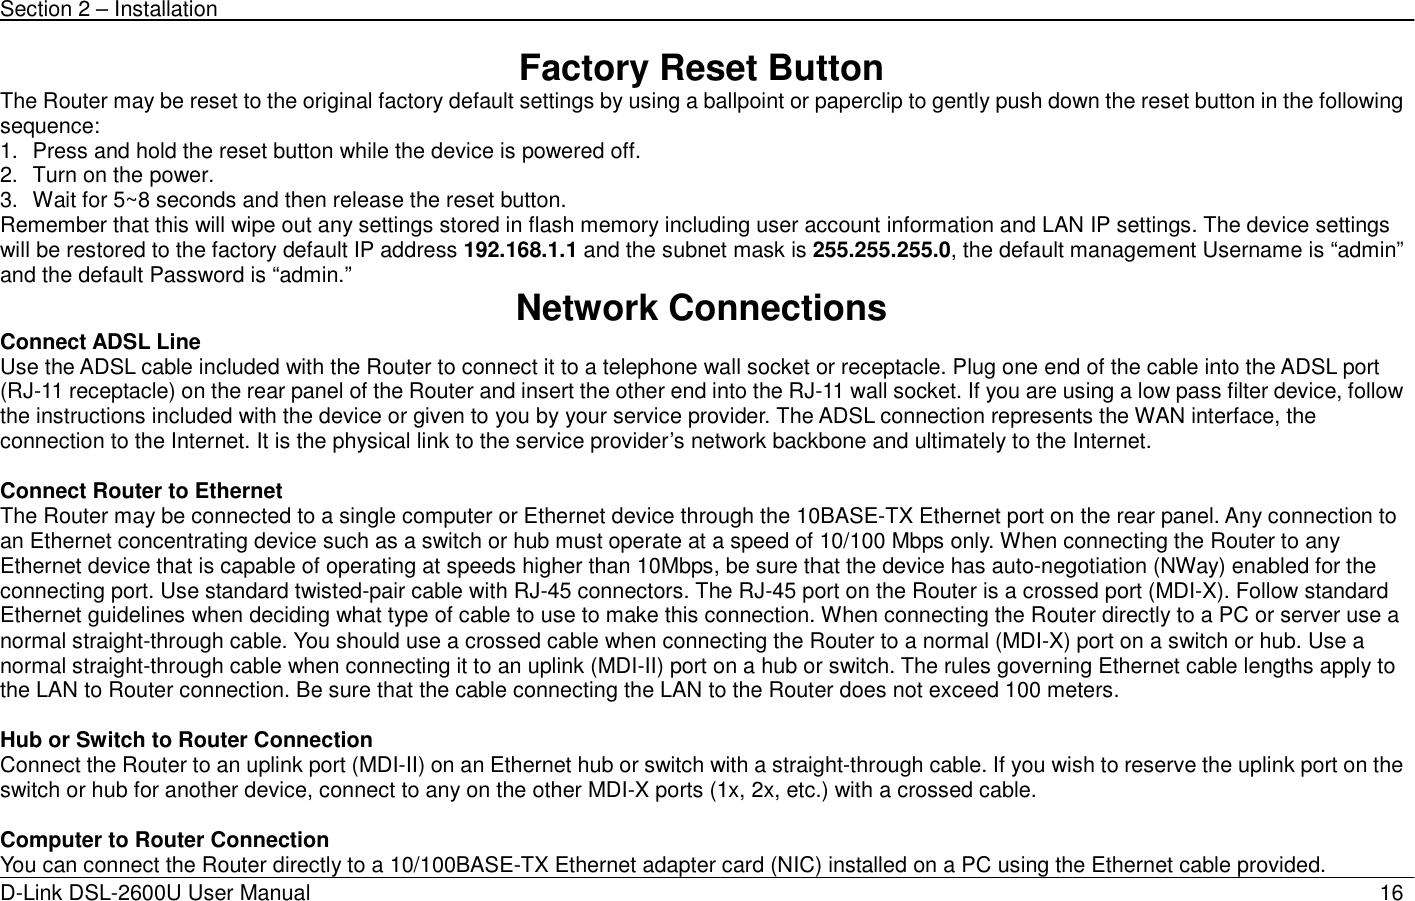 Section 2 – Installation   D-Link DSL-2600U User Manual                            16Factory Reset Button The Router may be reset to the original factory default settings by using a ballpoint or paperclip to gently push down the reset button in the following sequence:  1.  Press and hold the reset button while the device is powered off. 2.  Turn on the power. 3.  Wait for 5~8 seconds and then release the reset button.   Remember that this will wipe out any settings stored in flash memory including user account information and LAN IP settings. The device settings will be restored to the factory default IP address 192.168.1.1 and the subnet mask is 255.255.255.0, the default management Username is “admin” and the default Password is “admin.”  Network Connections   Connect ADSL Line Use the ADSL cable included with the Router to connect it to a telephone wall socket or receptacle. Plug one end of the cable into the ADSL port (RJ-11 receptacle) on the rear panel of the Router and insert the other end into the RJ-11 wall socket. If you are using a low pass filter device, follow the instructions included with the device or given to you by your service provider. The ADSL connection represents the WAN interface, the connection to the Internet. It is the physical link to the service provider’s network backbone and ultimately to the Internet.    Connect Router to Ethernet   The Router may be connected to a single computer or Ethernet device through the 10BASE-TX Ethernet port on the rear panel. Any connection to an Ethernet concentrating device such as a switch or hub must operate at a speed of 10/100 Mbps only. When connecting the Router to any Ethernet device that is capable of operating at speeds higher than 10Mbps, be sure that the device has auto-negotiation (NWay) enabled for the connecting port. Use standard twisted-pair cable with RJ-45 connectors. The RJ-45 port on the Router is a crossed port (MDI-X). Follow standard Ethernet guidelines when deciding what type of cable to use to make this connection. When connecting the Router directly to a PC or server use a normal straight-through cable. You should use a crossed cable when connecting the Router to a normal (MDI-X) port on a switch or hub. Use a normal straight-through cable when connecting it to an uplink (MDI-II) port on a hub or switch. The rules governing Ethernet cable lengths apply to the LAN to Router connection. Be sure that the cable connecting the LAN to the Router does not exceed 100 meters.  Hub or Switch to Router Connection Connect the Router to an uplink port (MDI-II) on an Ethernet hub or switch with a straight-through cable. If you wish to reserve the uplink port on the switch or hub for another device, connect to any on the other MDI-X ports (1x, 2x, etc.) with a crossed cable.  Computer to Router Connection You can connect the Router directly to a 10/100BASE-TX Ethernet adapter card (NIC) installed on a PC using the Ethernet cable provided.